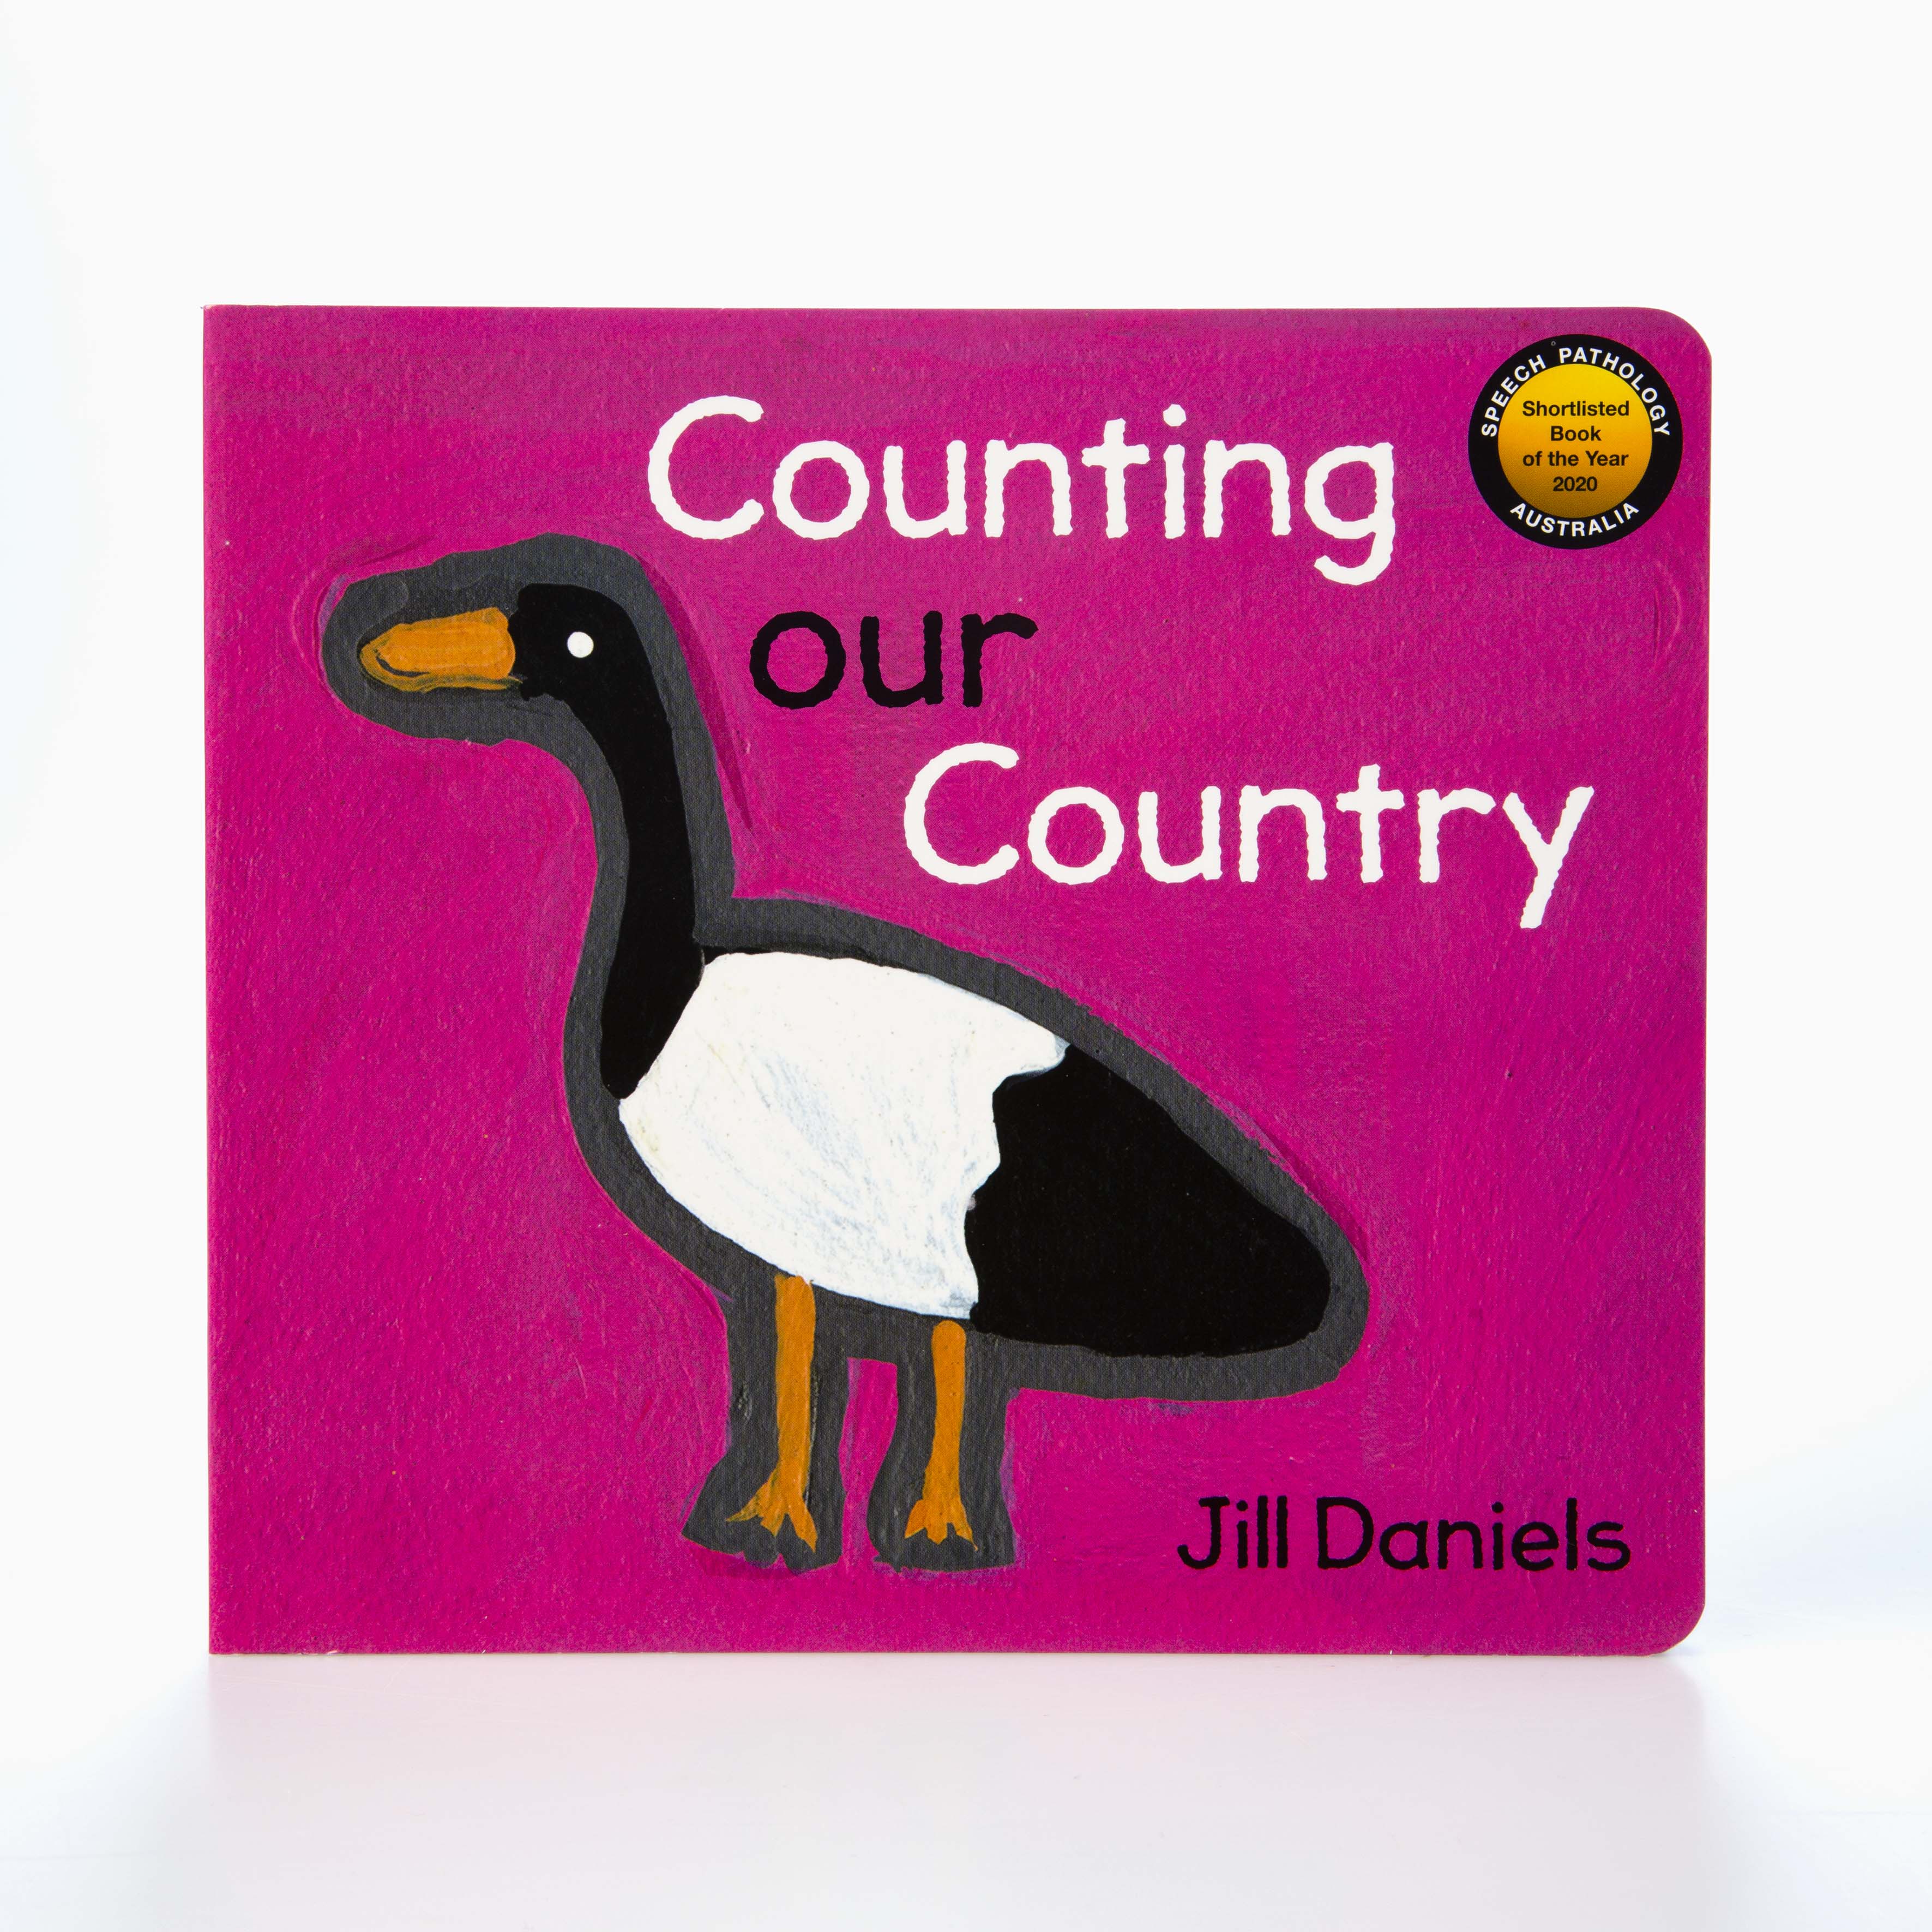 Counting our Country